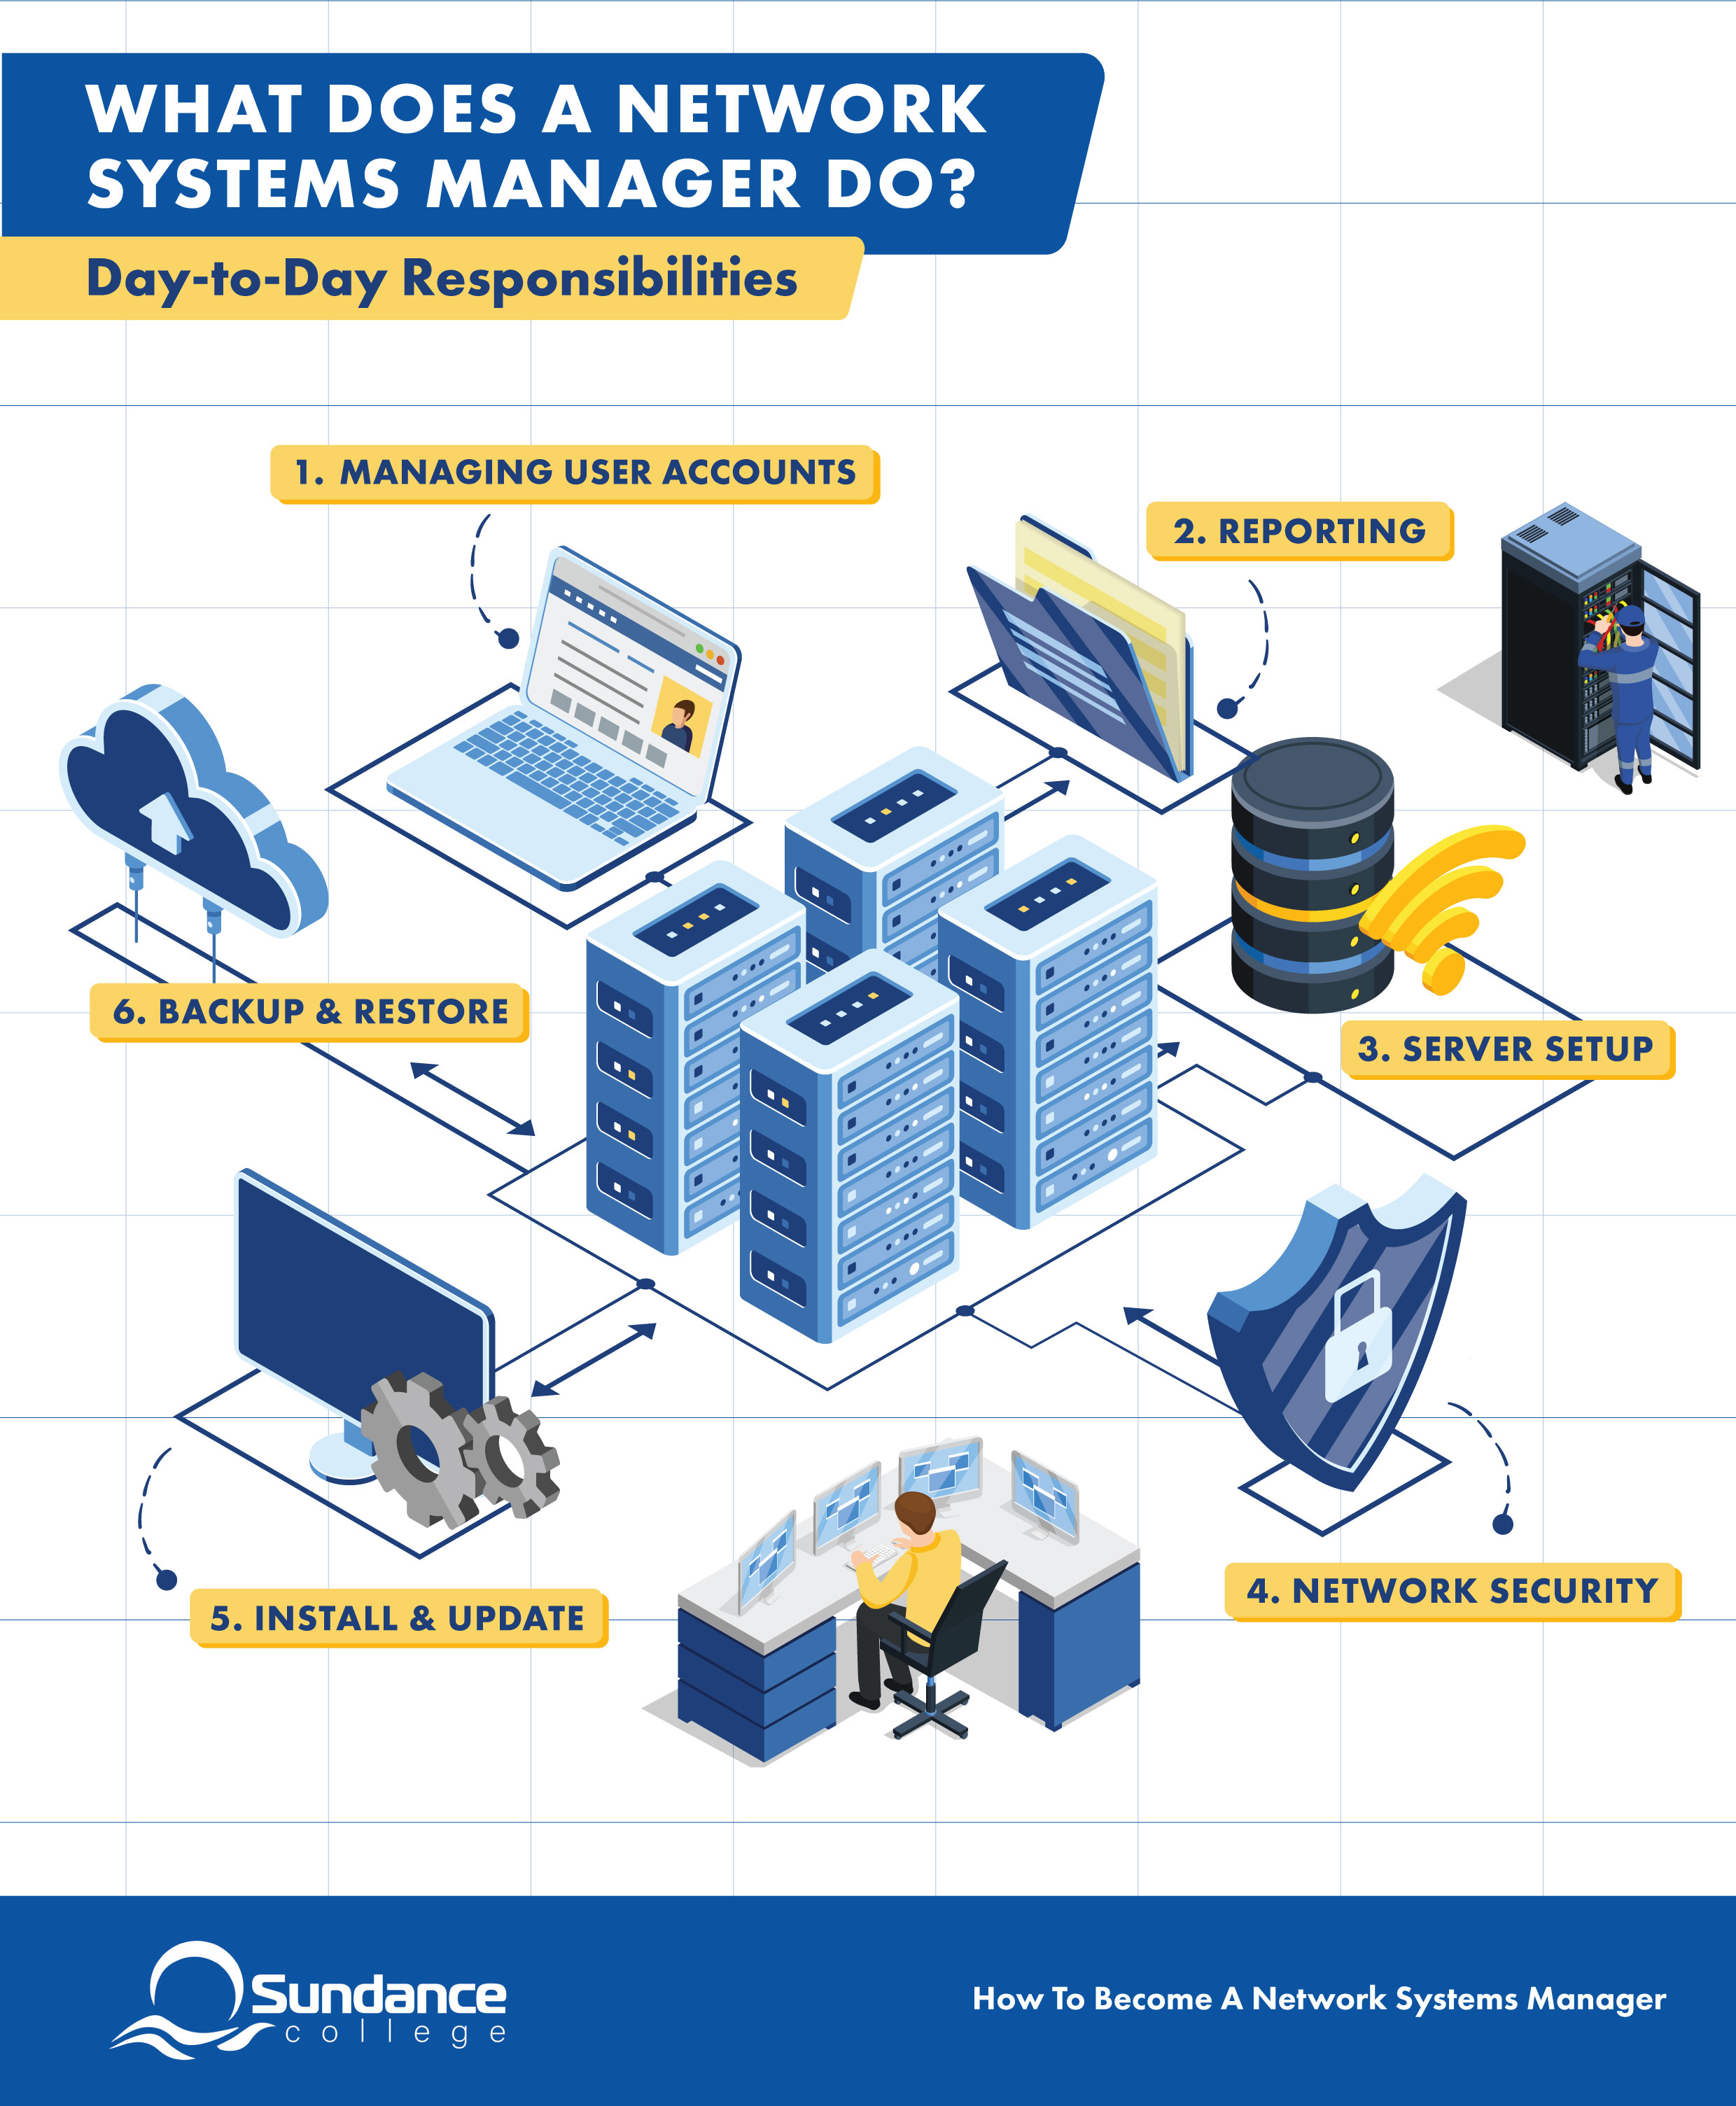 An infographic made by sundance college about what a network systems manager does that includes managing user accounts, reporting, server setup, security, install and update, and backup and restore day-to-day responsibilities.